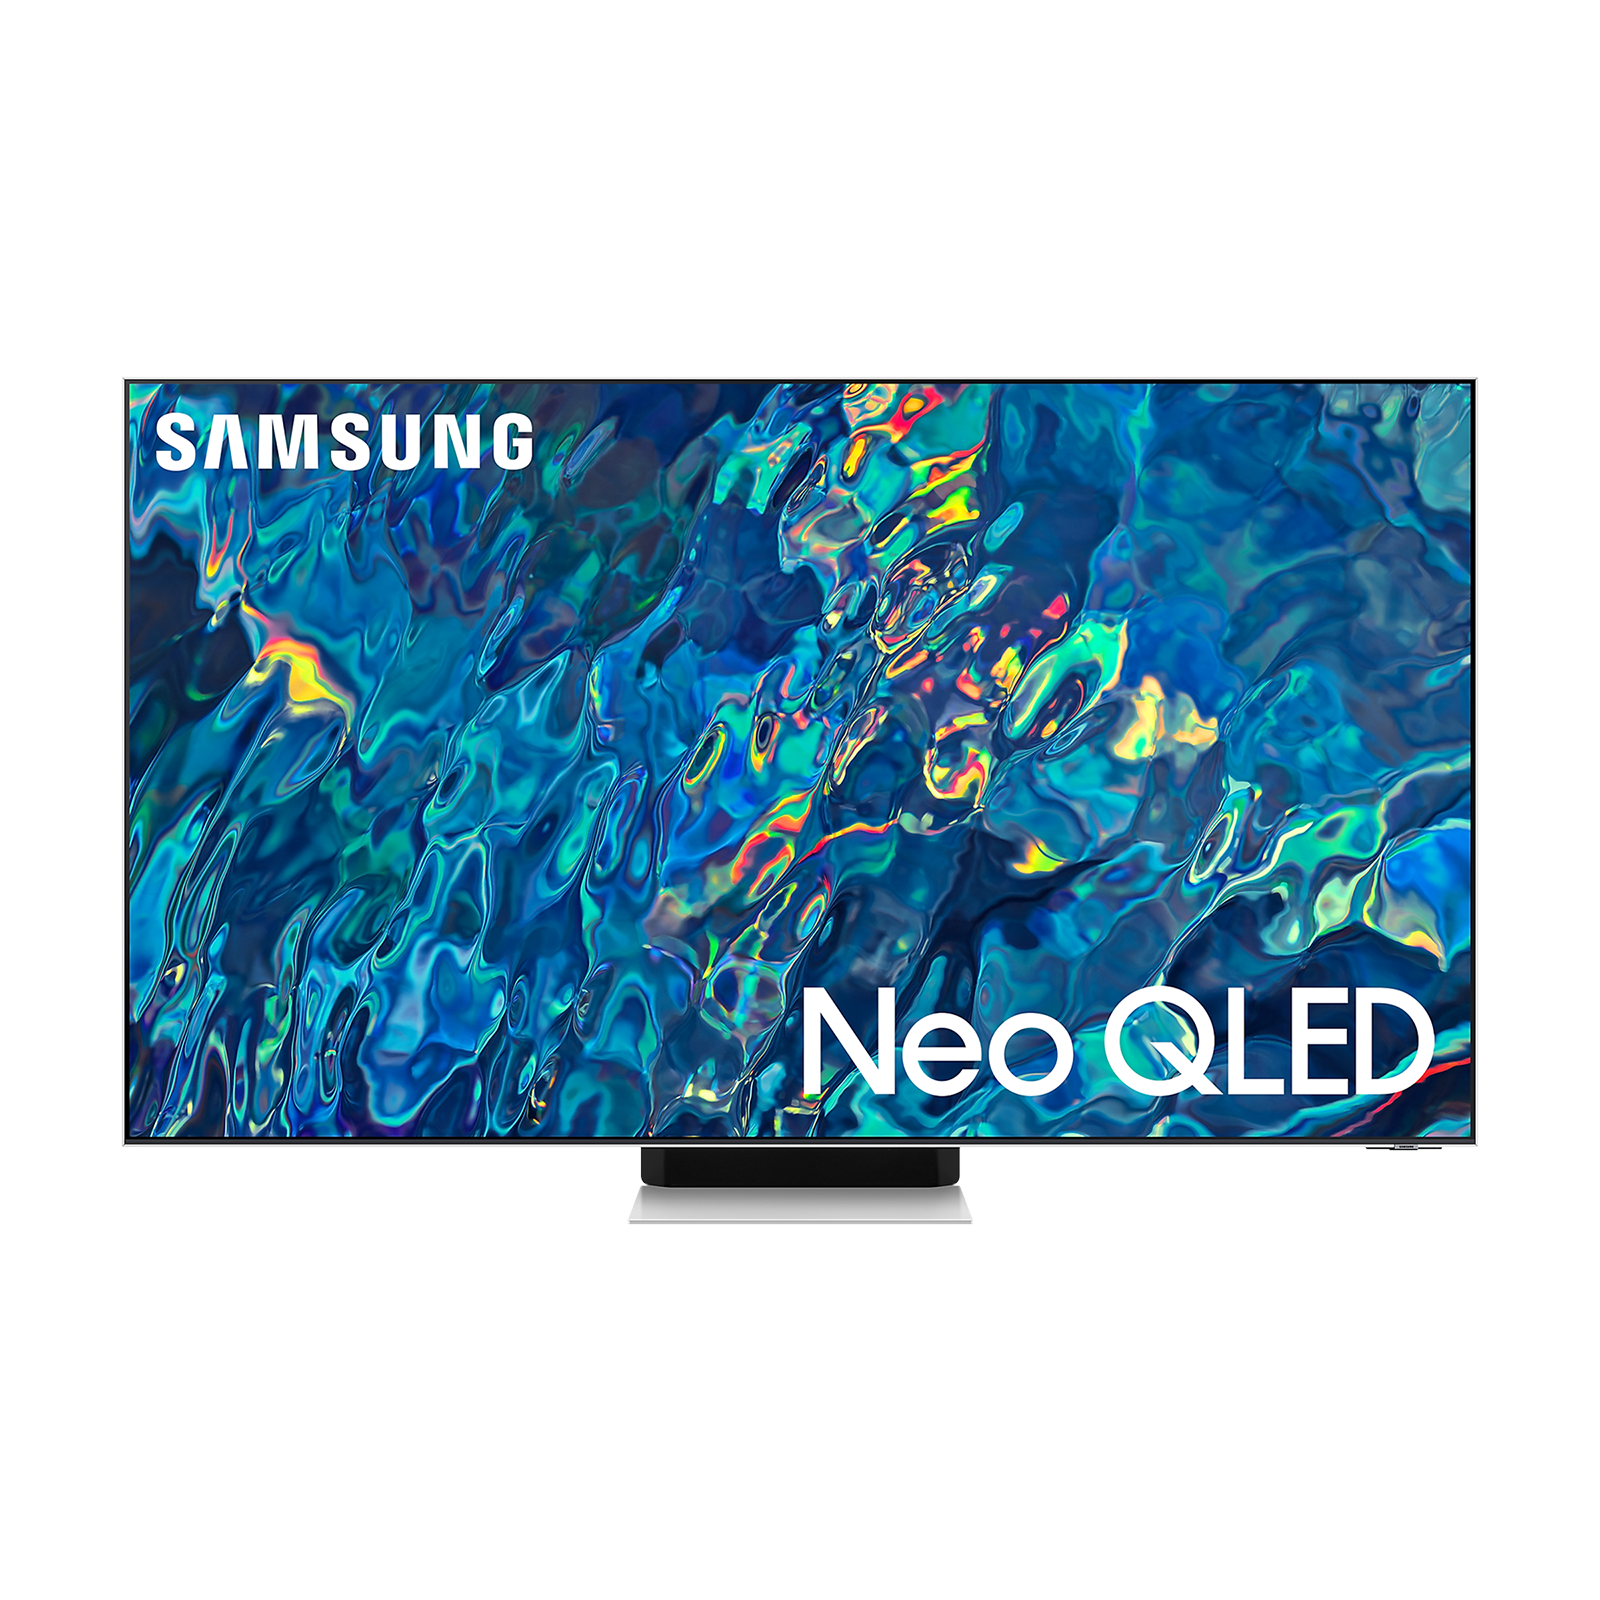 SAMSUNG Series 9 138 cm (55 inch) QLED 4K Ultra HD Tizen TV with Alexa Compatibility (2022 model)